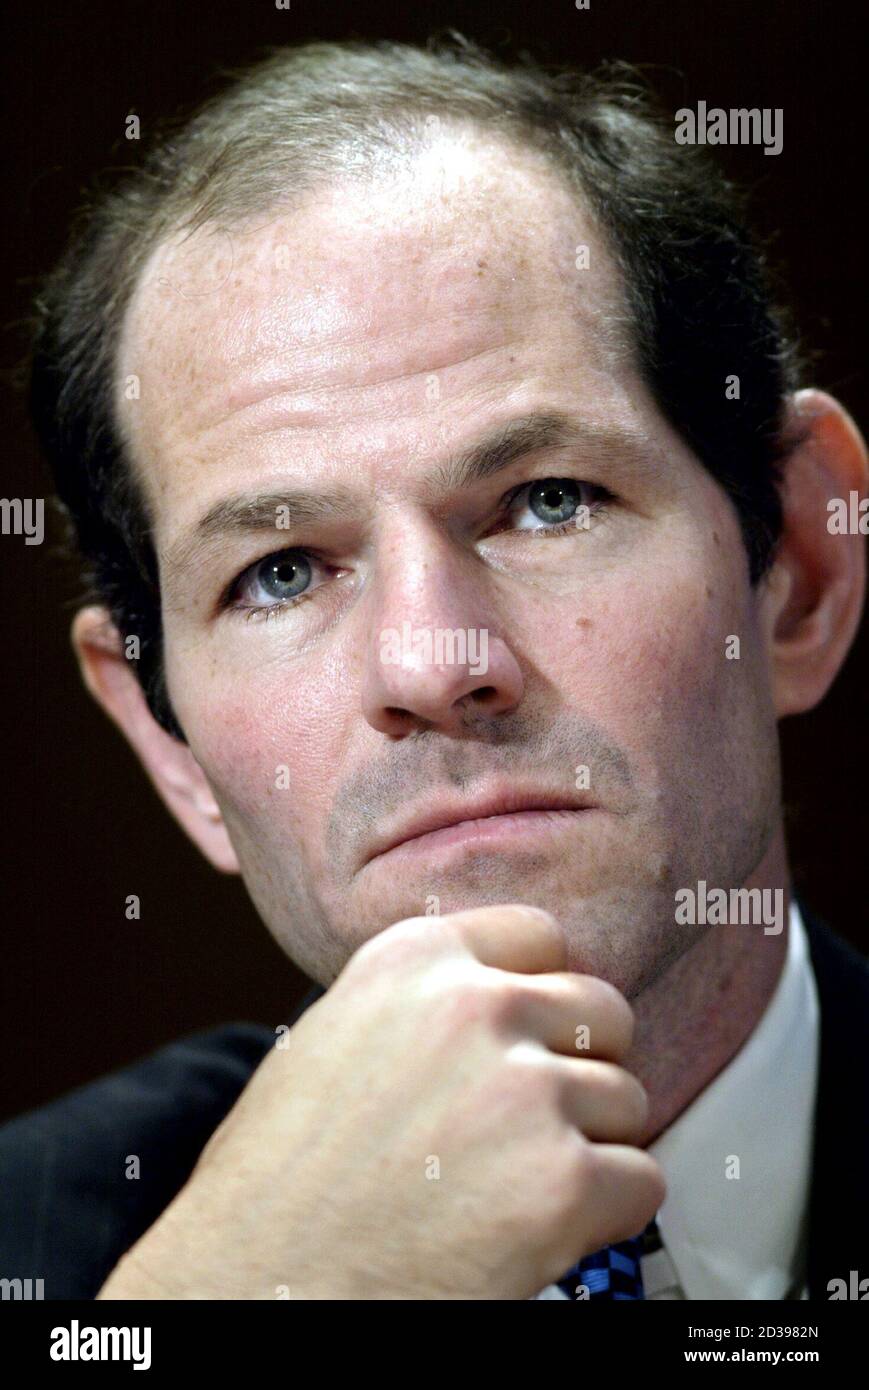 New York Attorney General Eliot Spitzer listens to opening remarks from members of the Senate Governmental Affairs Subcommittee on Financial Management, the Budget, and International Security, during a hearing on Capitol Hill, November 3, 2003. The hearing was called to investigate abuses in the mutual fund industry. Stock Photo